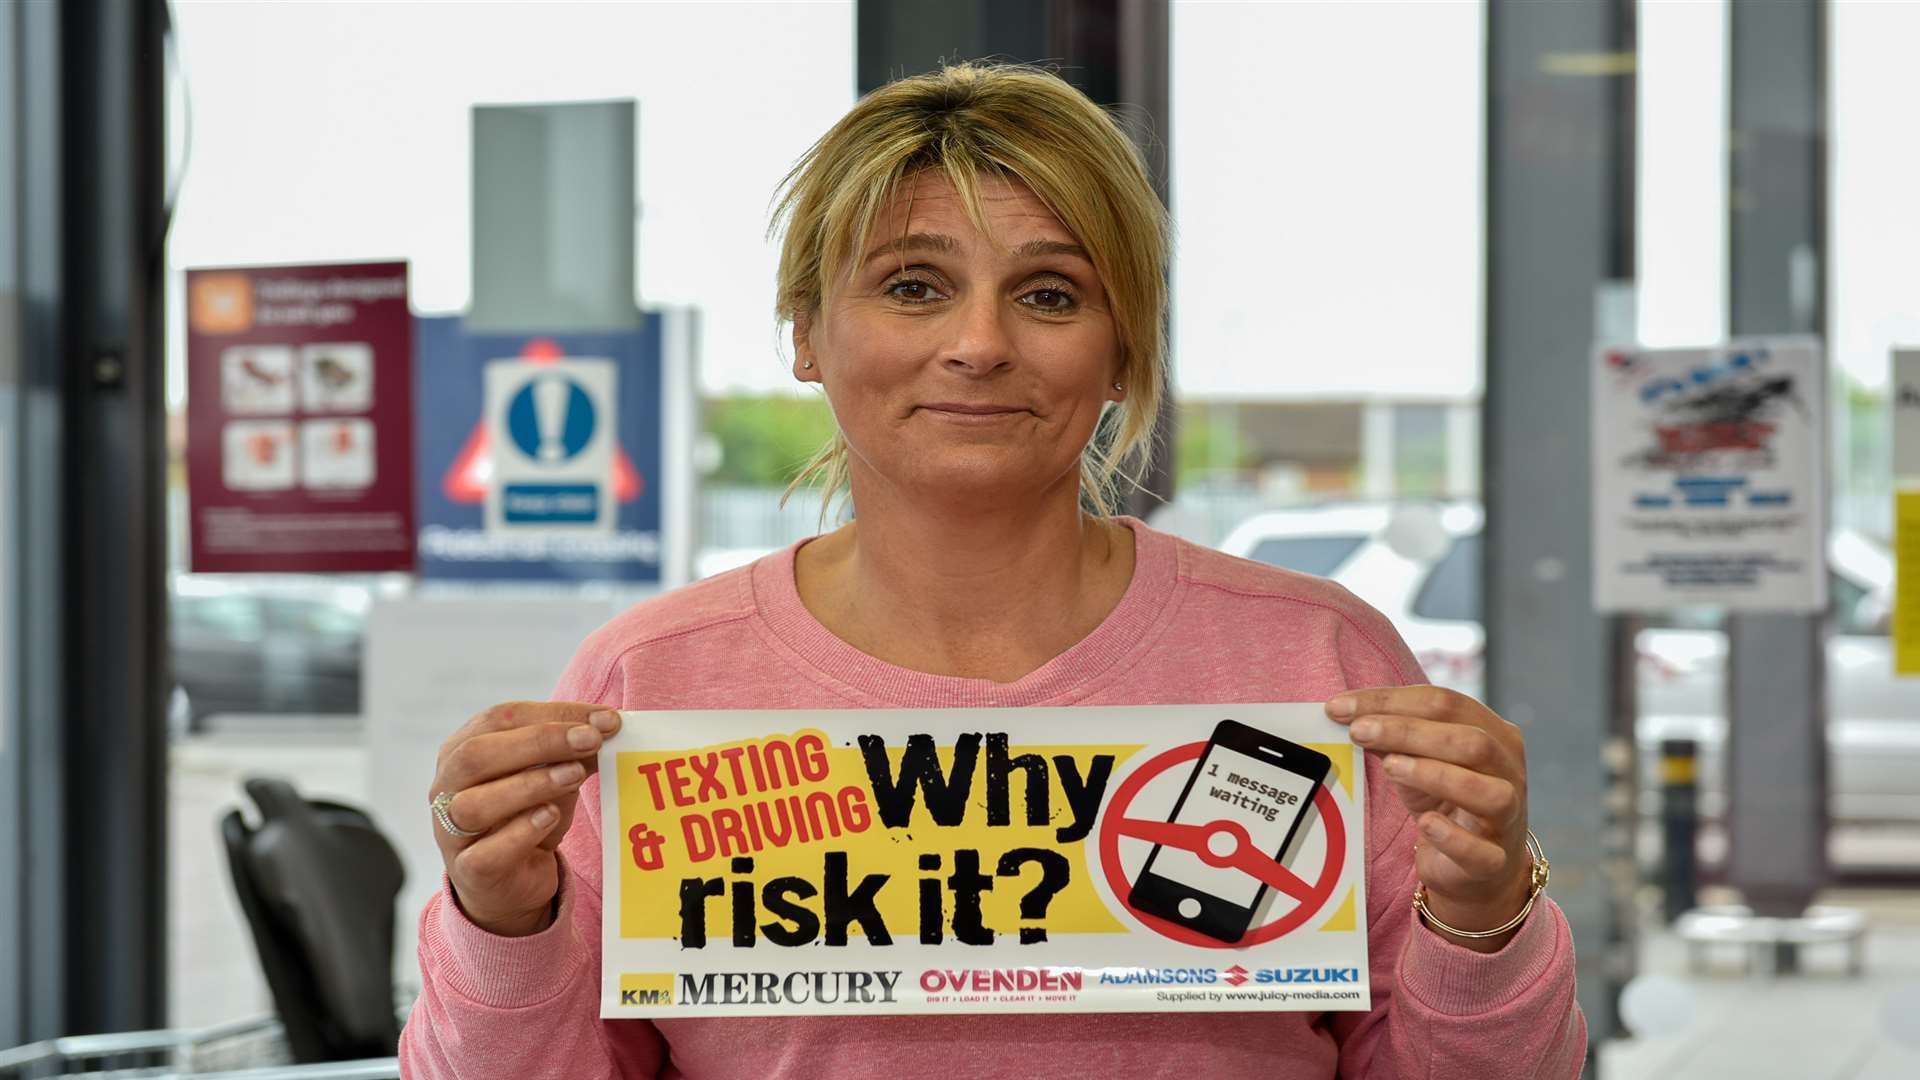 Tracy Squire, Mum of Daniel Squire, a teenage cyclist who was killed after being knocked off his bike, gave out Why Risk It? stickers against texting while driving